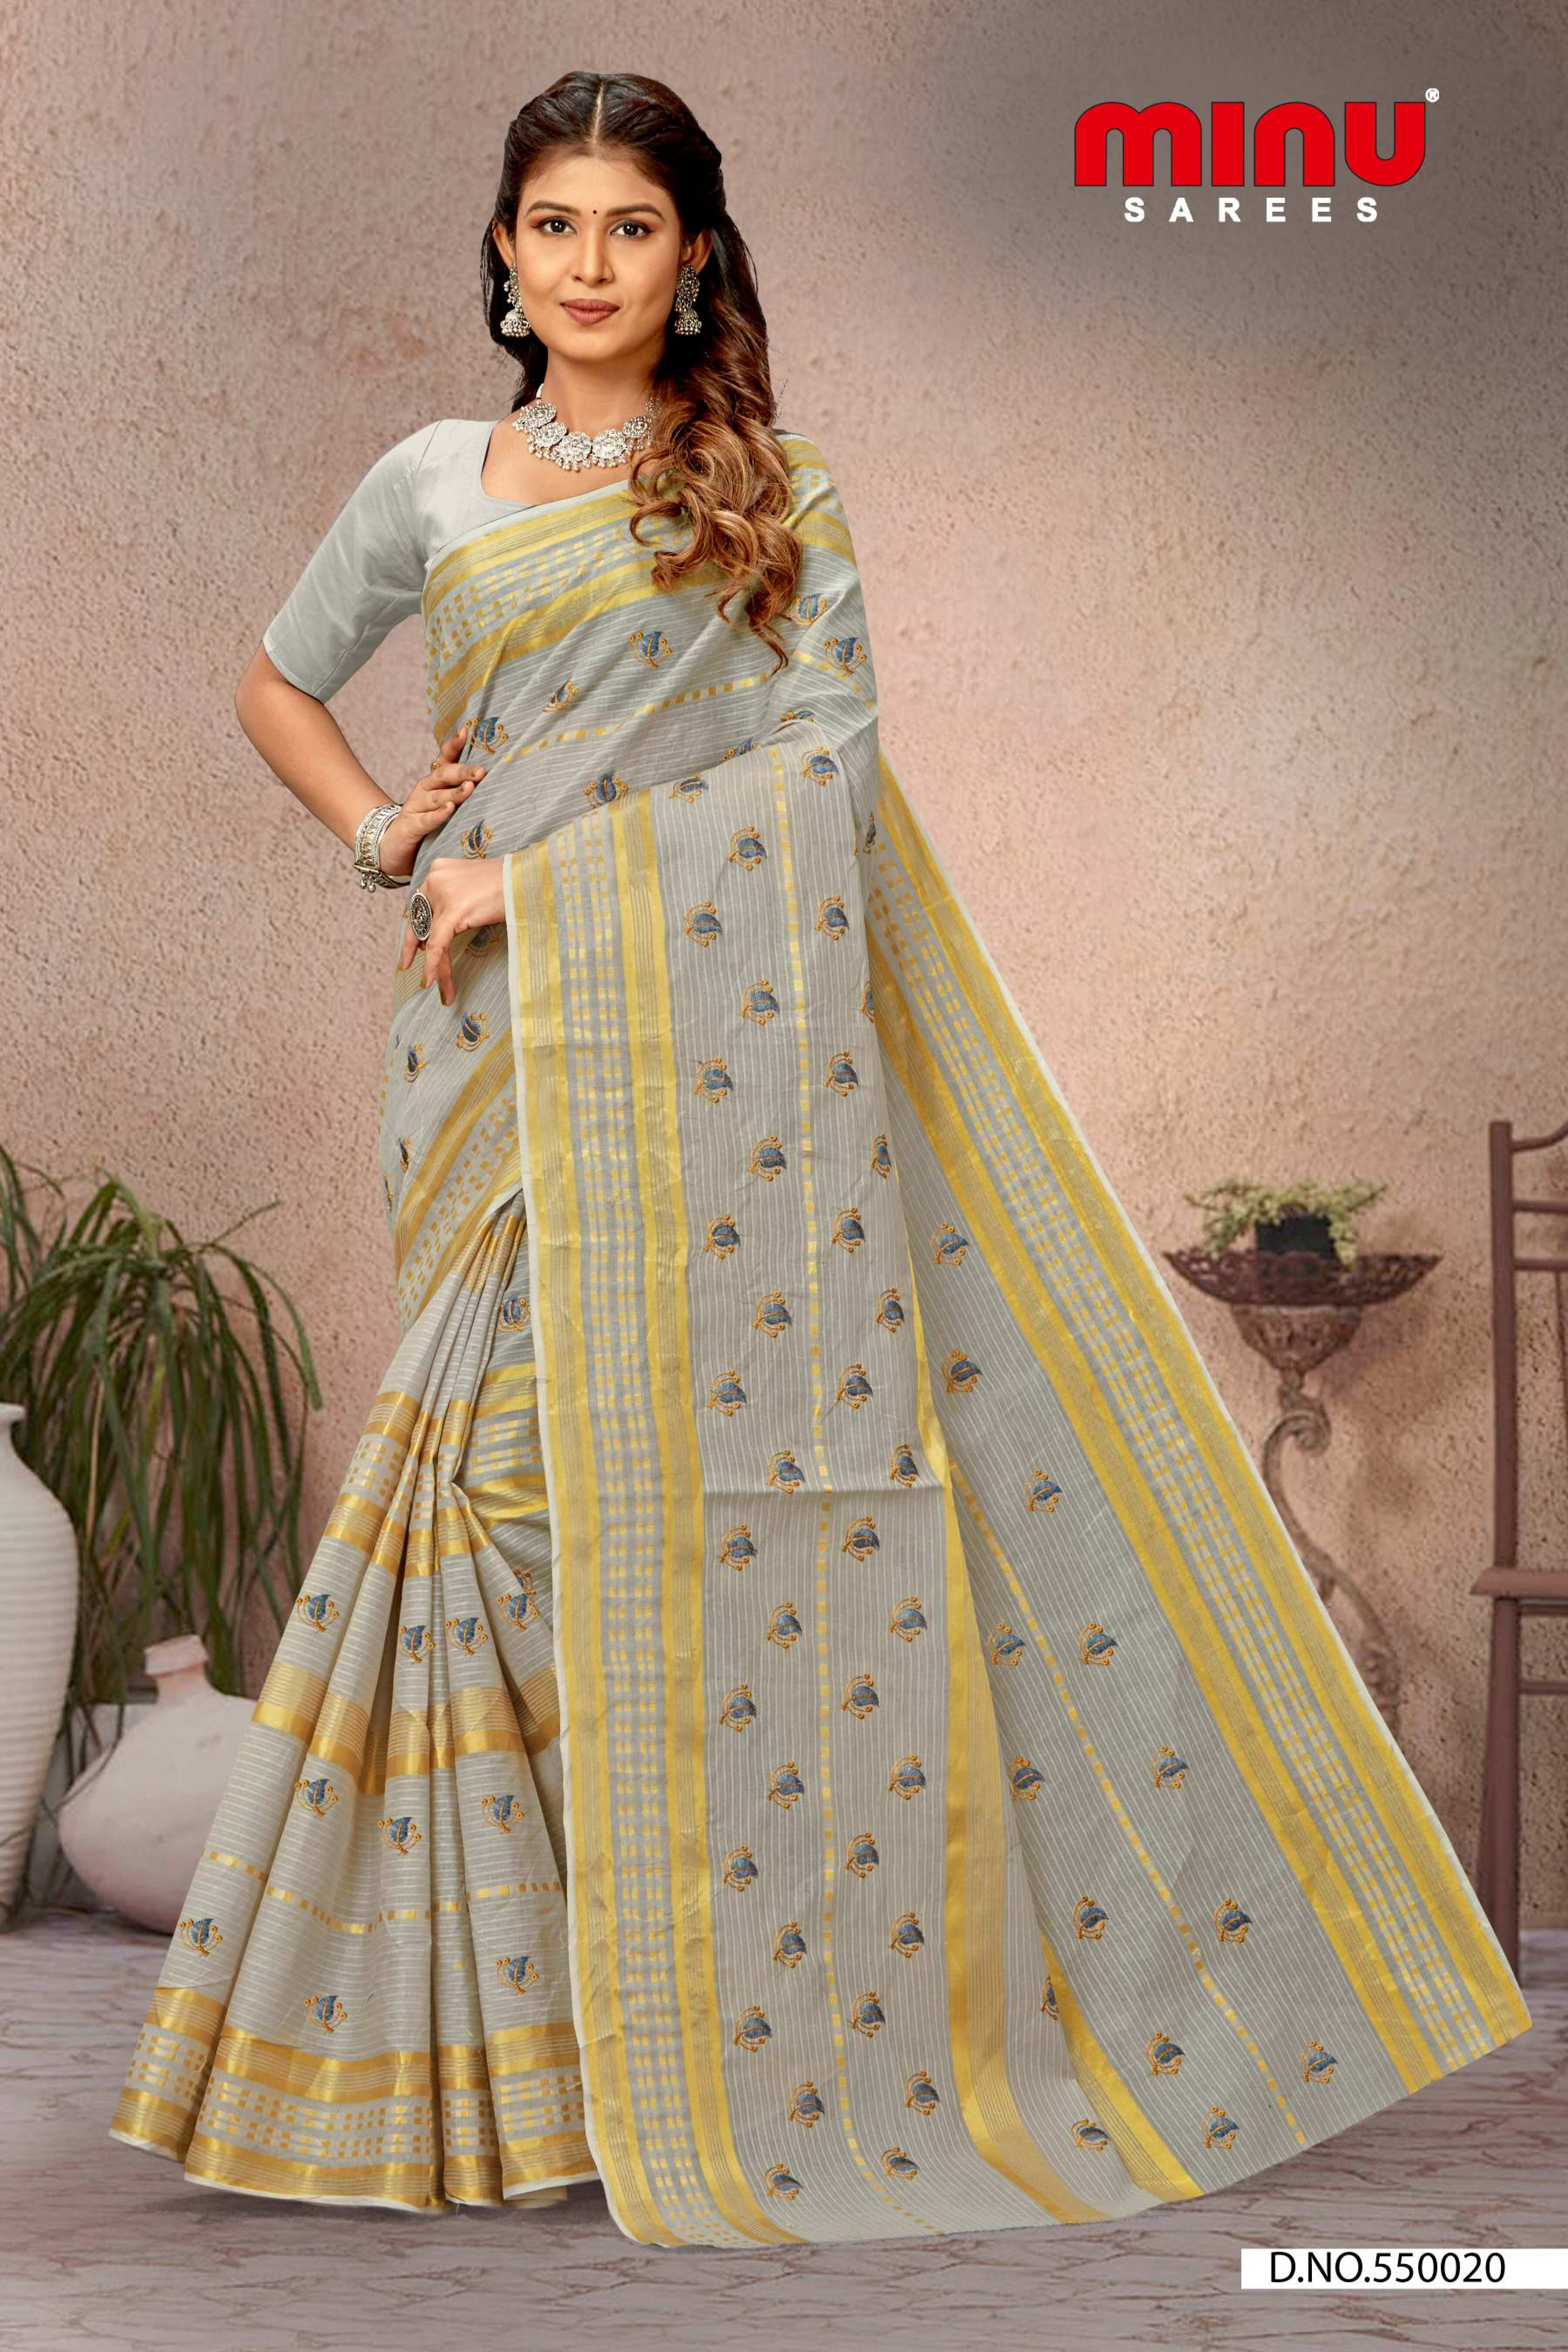 bold and classy printed cotton saree wearing woman